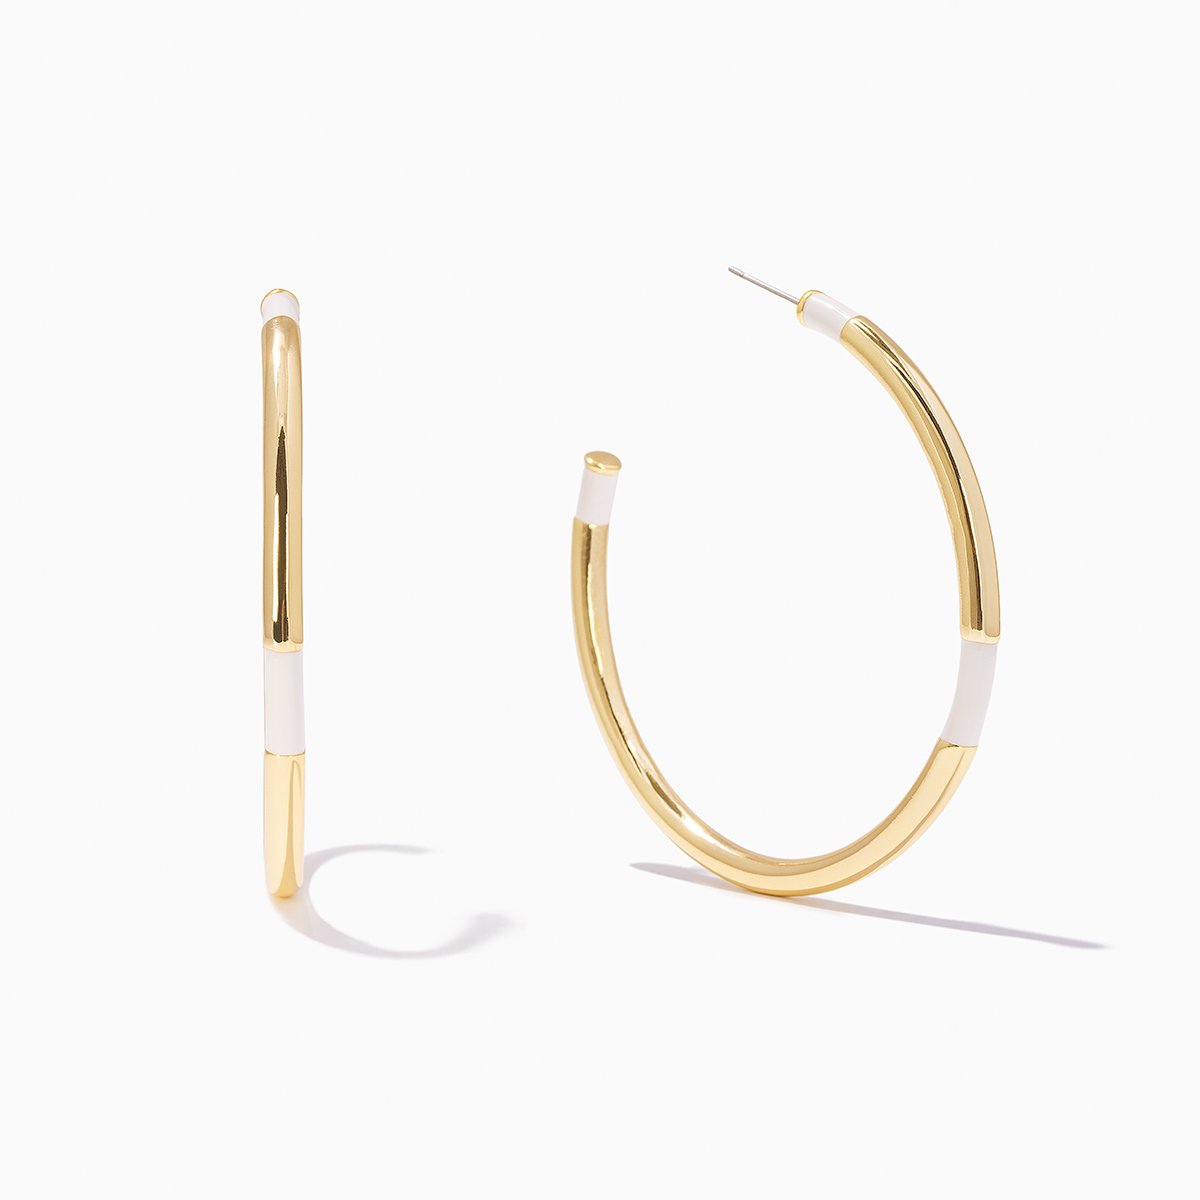 Uncommon James: Open Ended Hoops Earrings - Gold